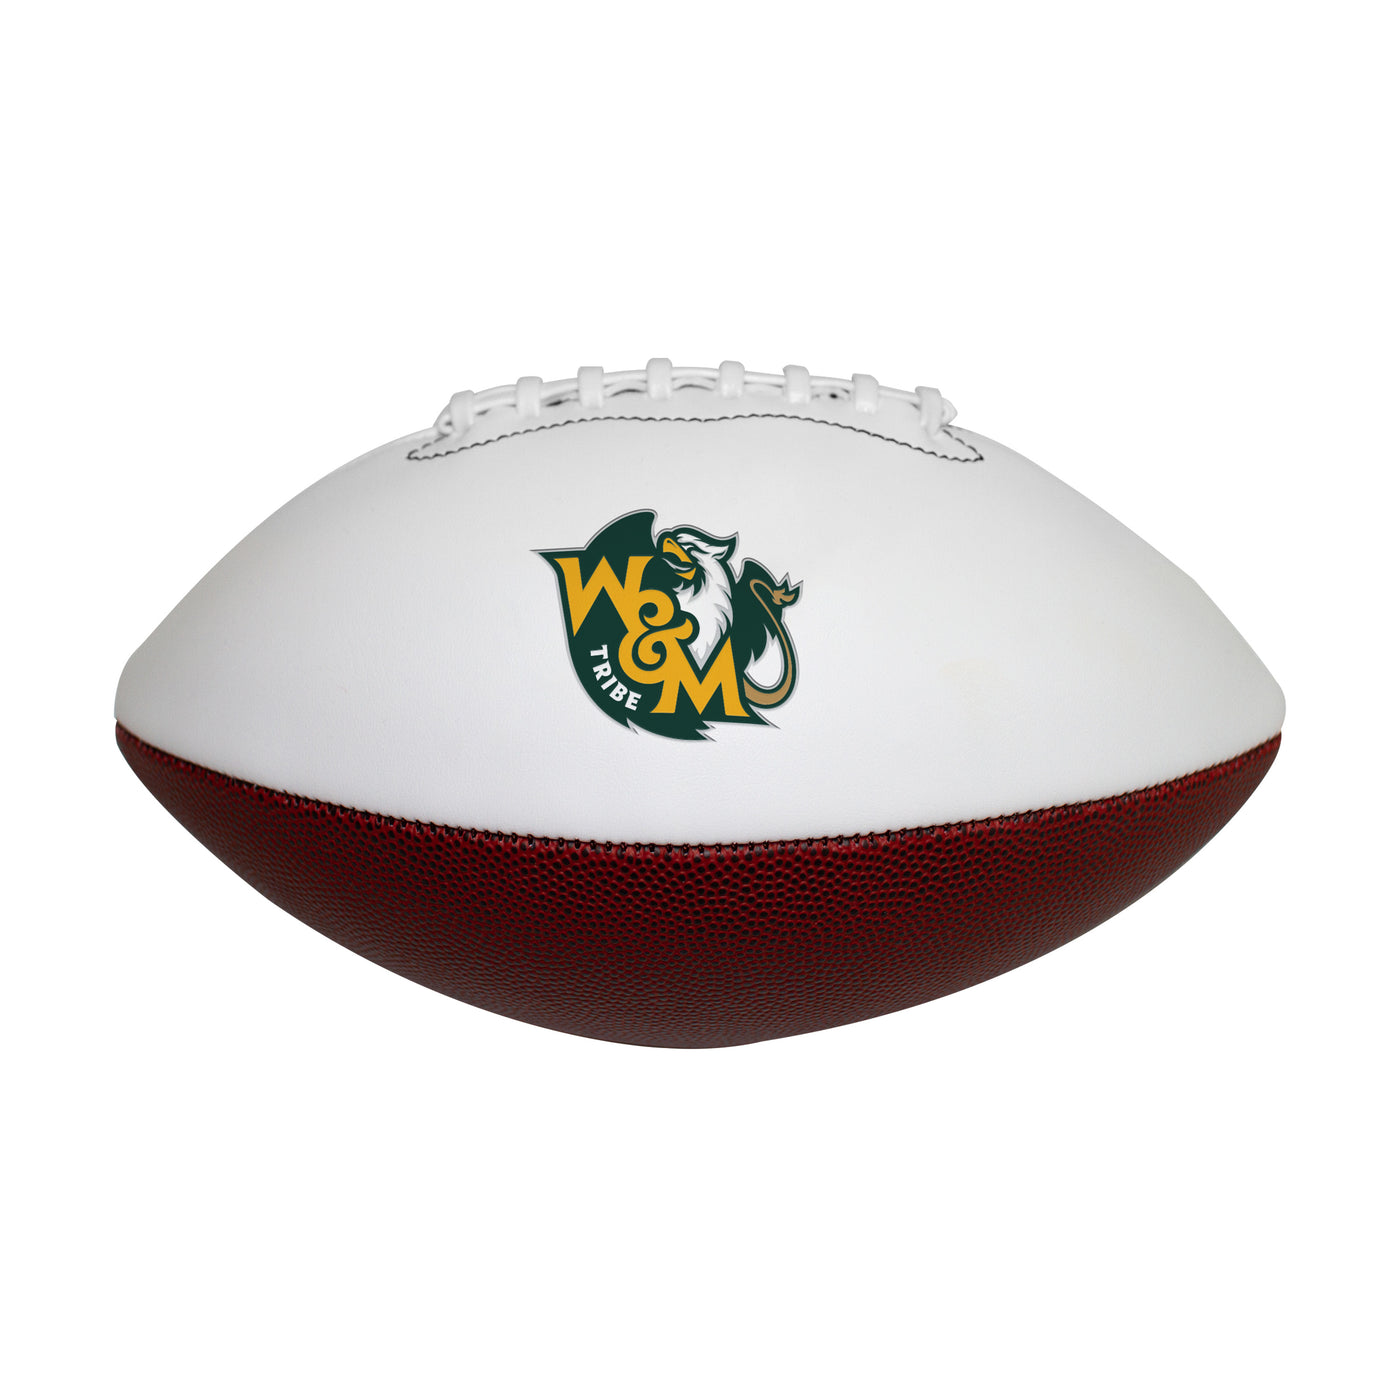 William and Mary Composite Brown Full Size Autograph Football